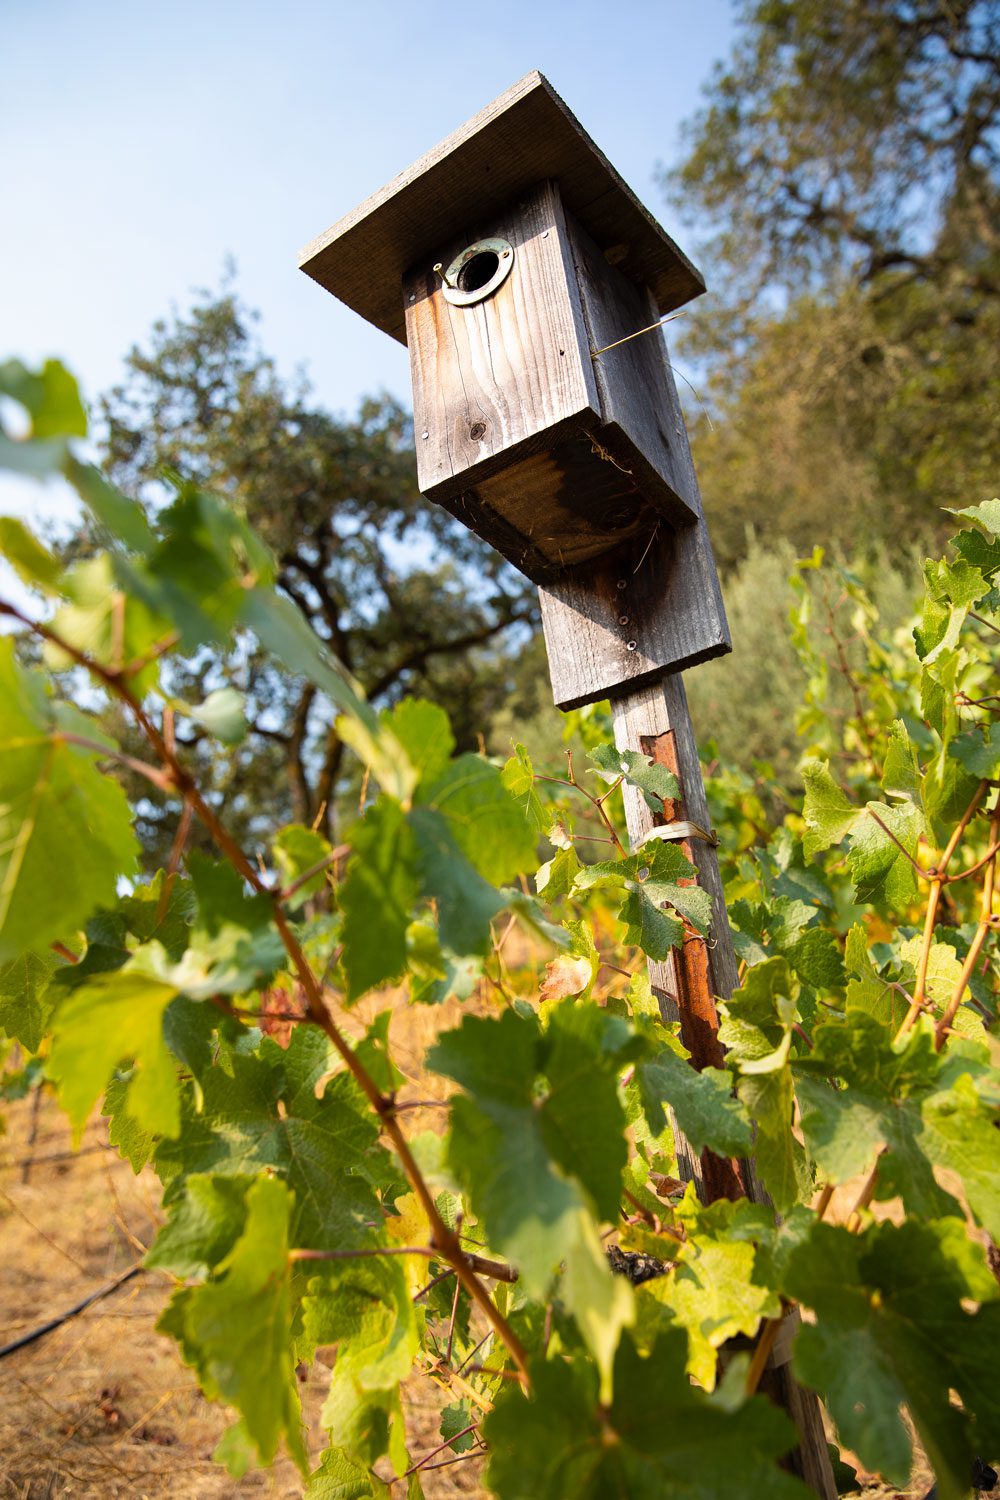 At Tres Sabores vineyard Johnson has pursued a long-term resilience strategy on her farm by installing over 50 nest boxes for bluebirds and owls. Photo by Kaare Iverson.